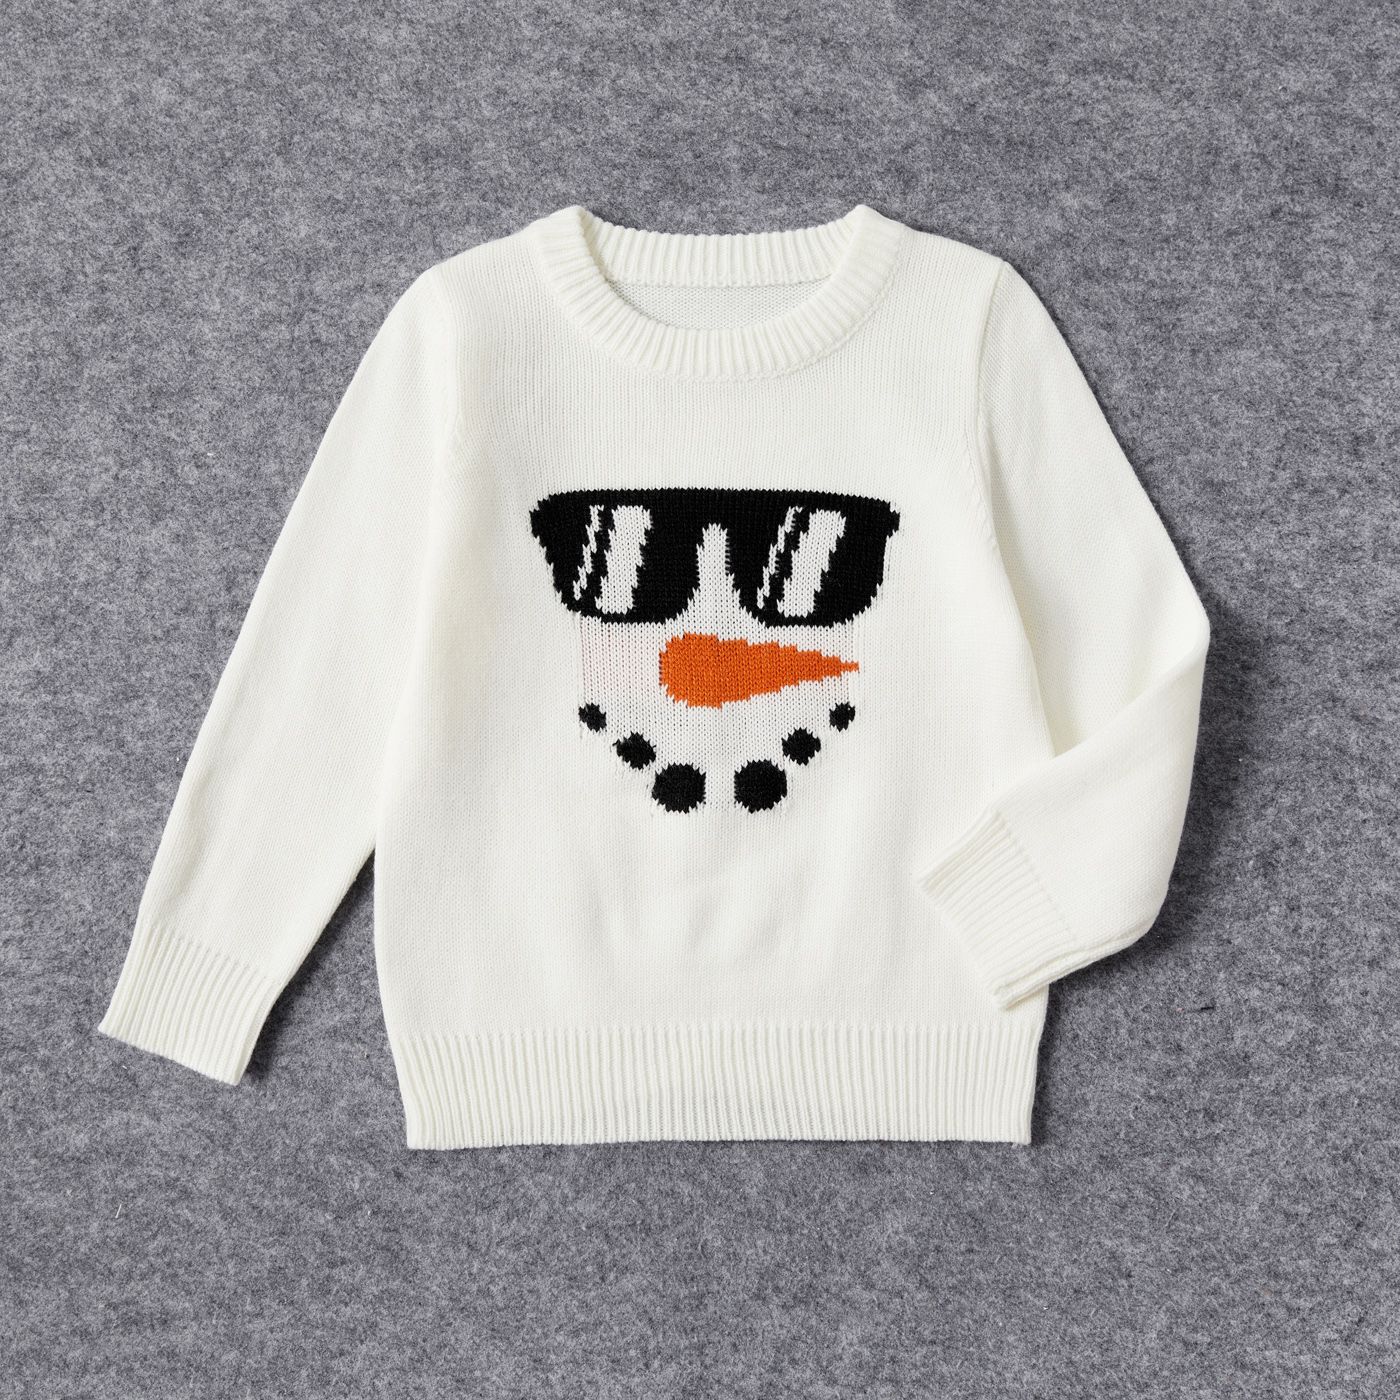 Christmas Family Matching Snowman Graphic White Knitted Belted Dresses And Tops Sets